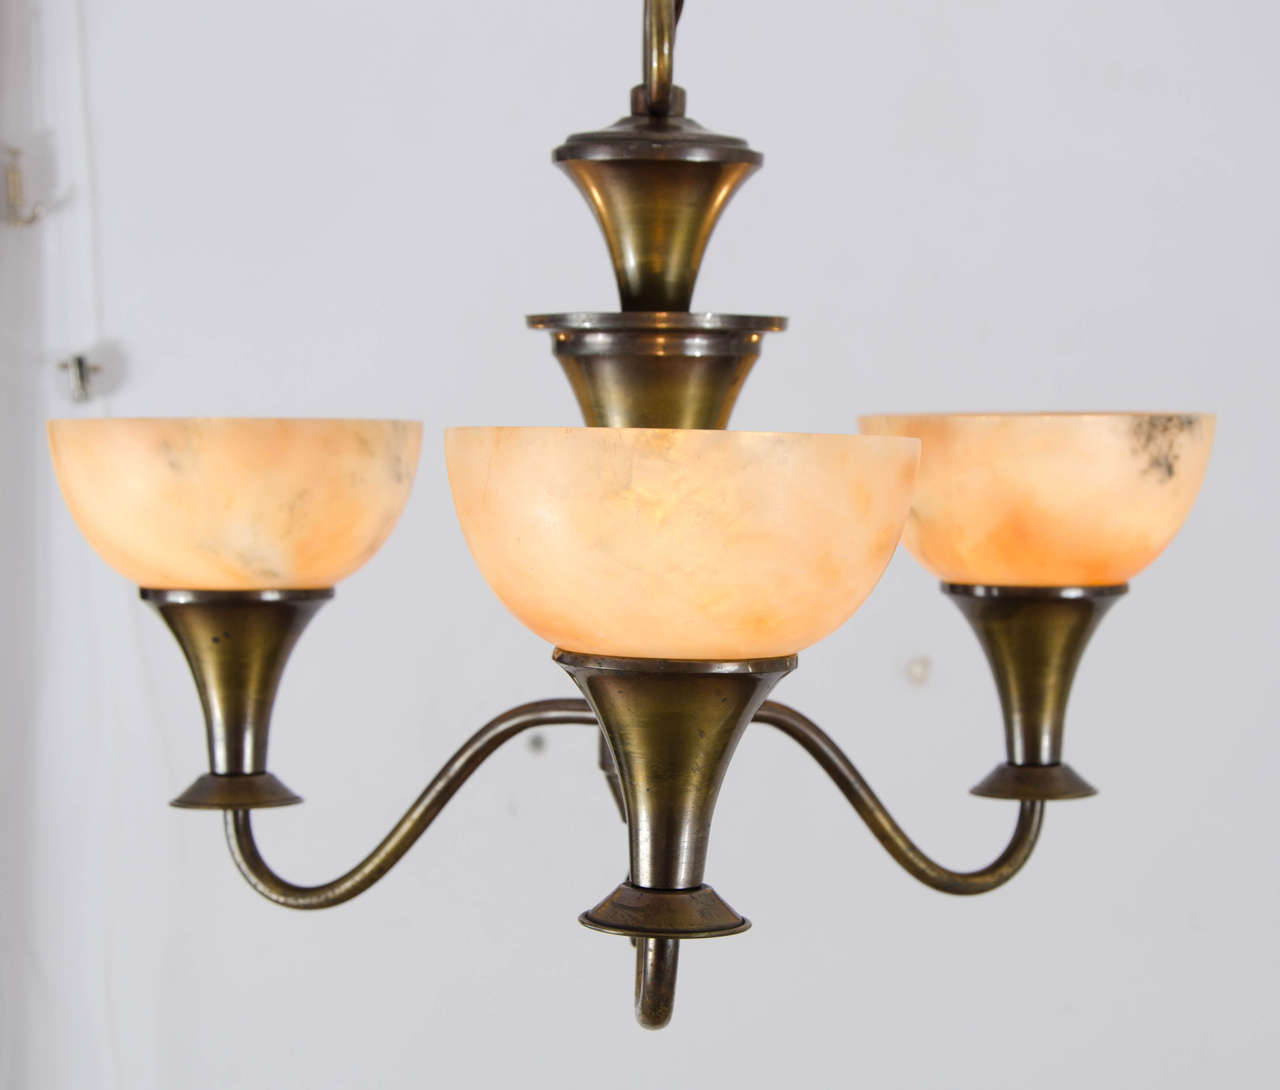 Brass metal frame patinated bronze chandelier is classical in form and shape.